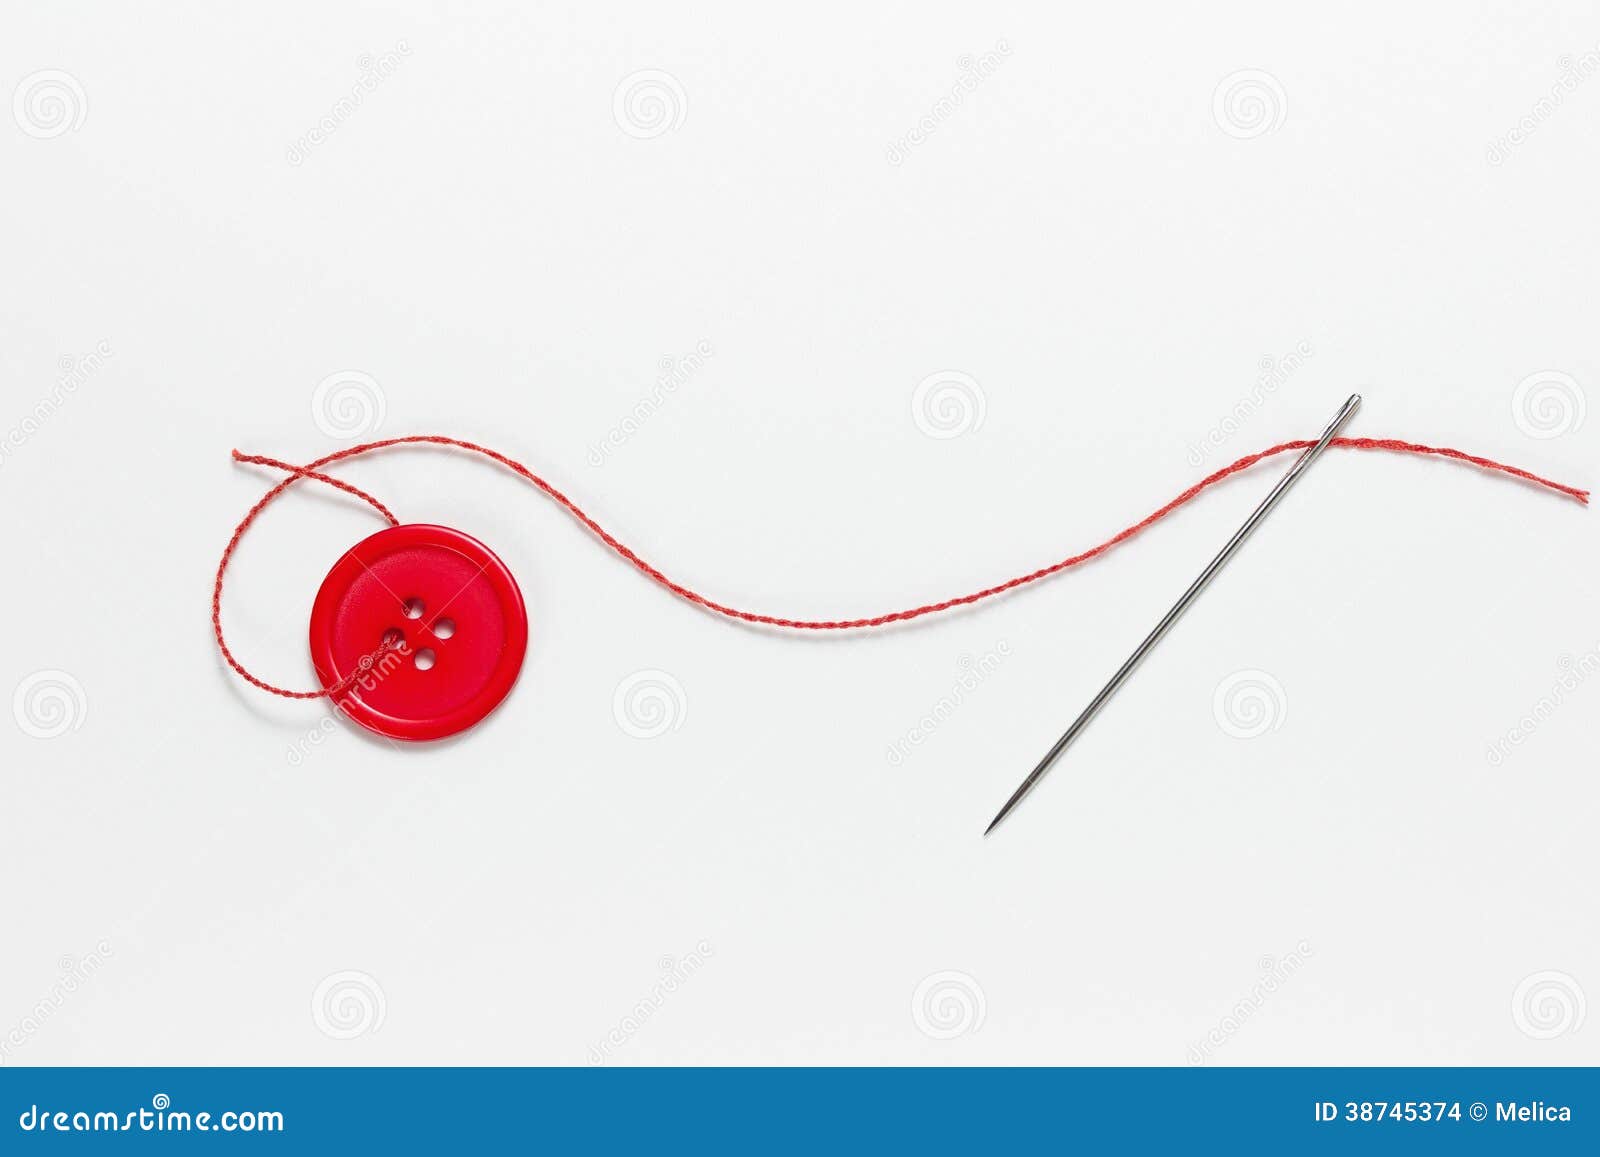 Needle and Button stock photo. Image of backdrop, holes - 38745374